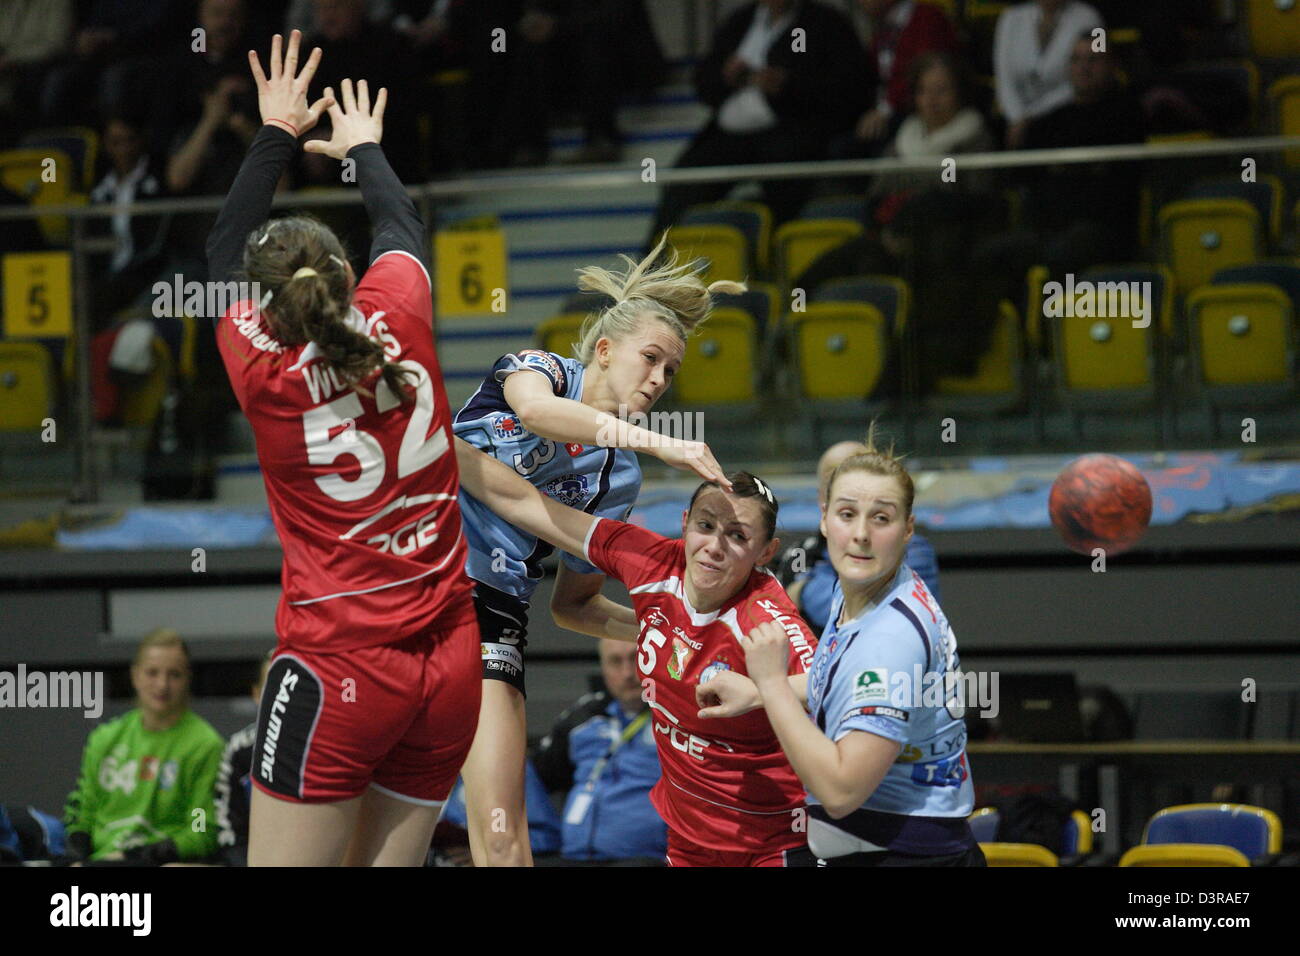 Gdynia, Poland 23rd, February 2013 Handball: Final Four of the PGNiG Polish Cup. SPR Lublin v KPR Ruch Chorzow game at HSW sports hall in Gdynia. Agnieszka Pieniowska (3) in action during the game. Credit:  Michal Fludra / Alamy Live News Stock Photo